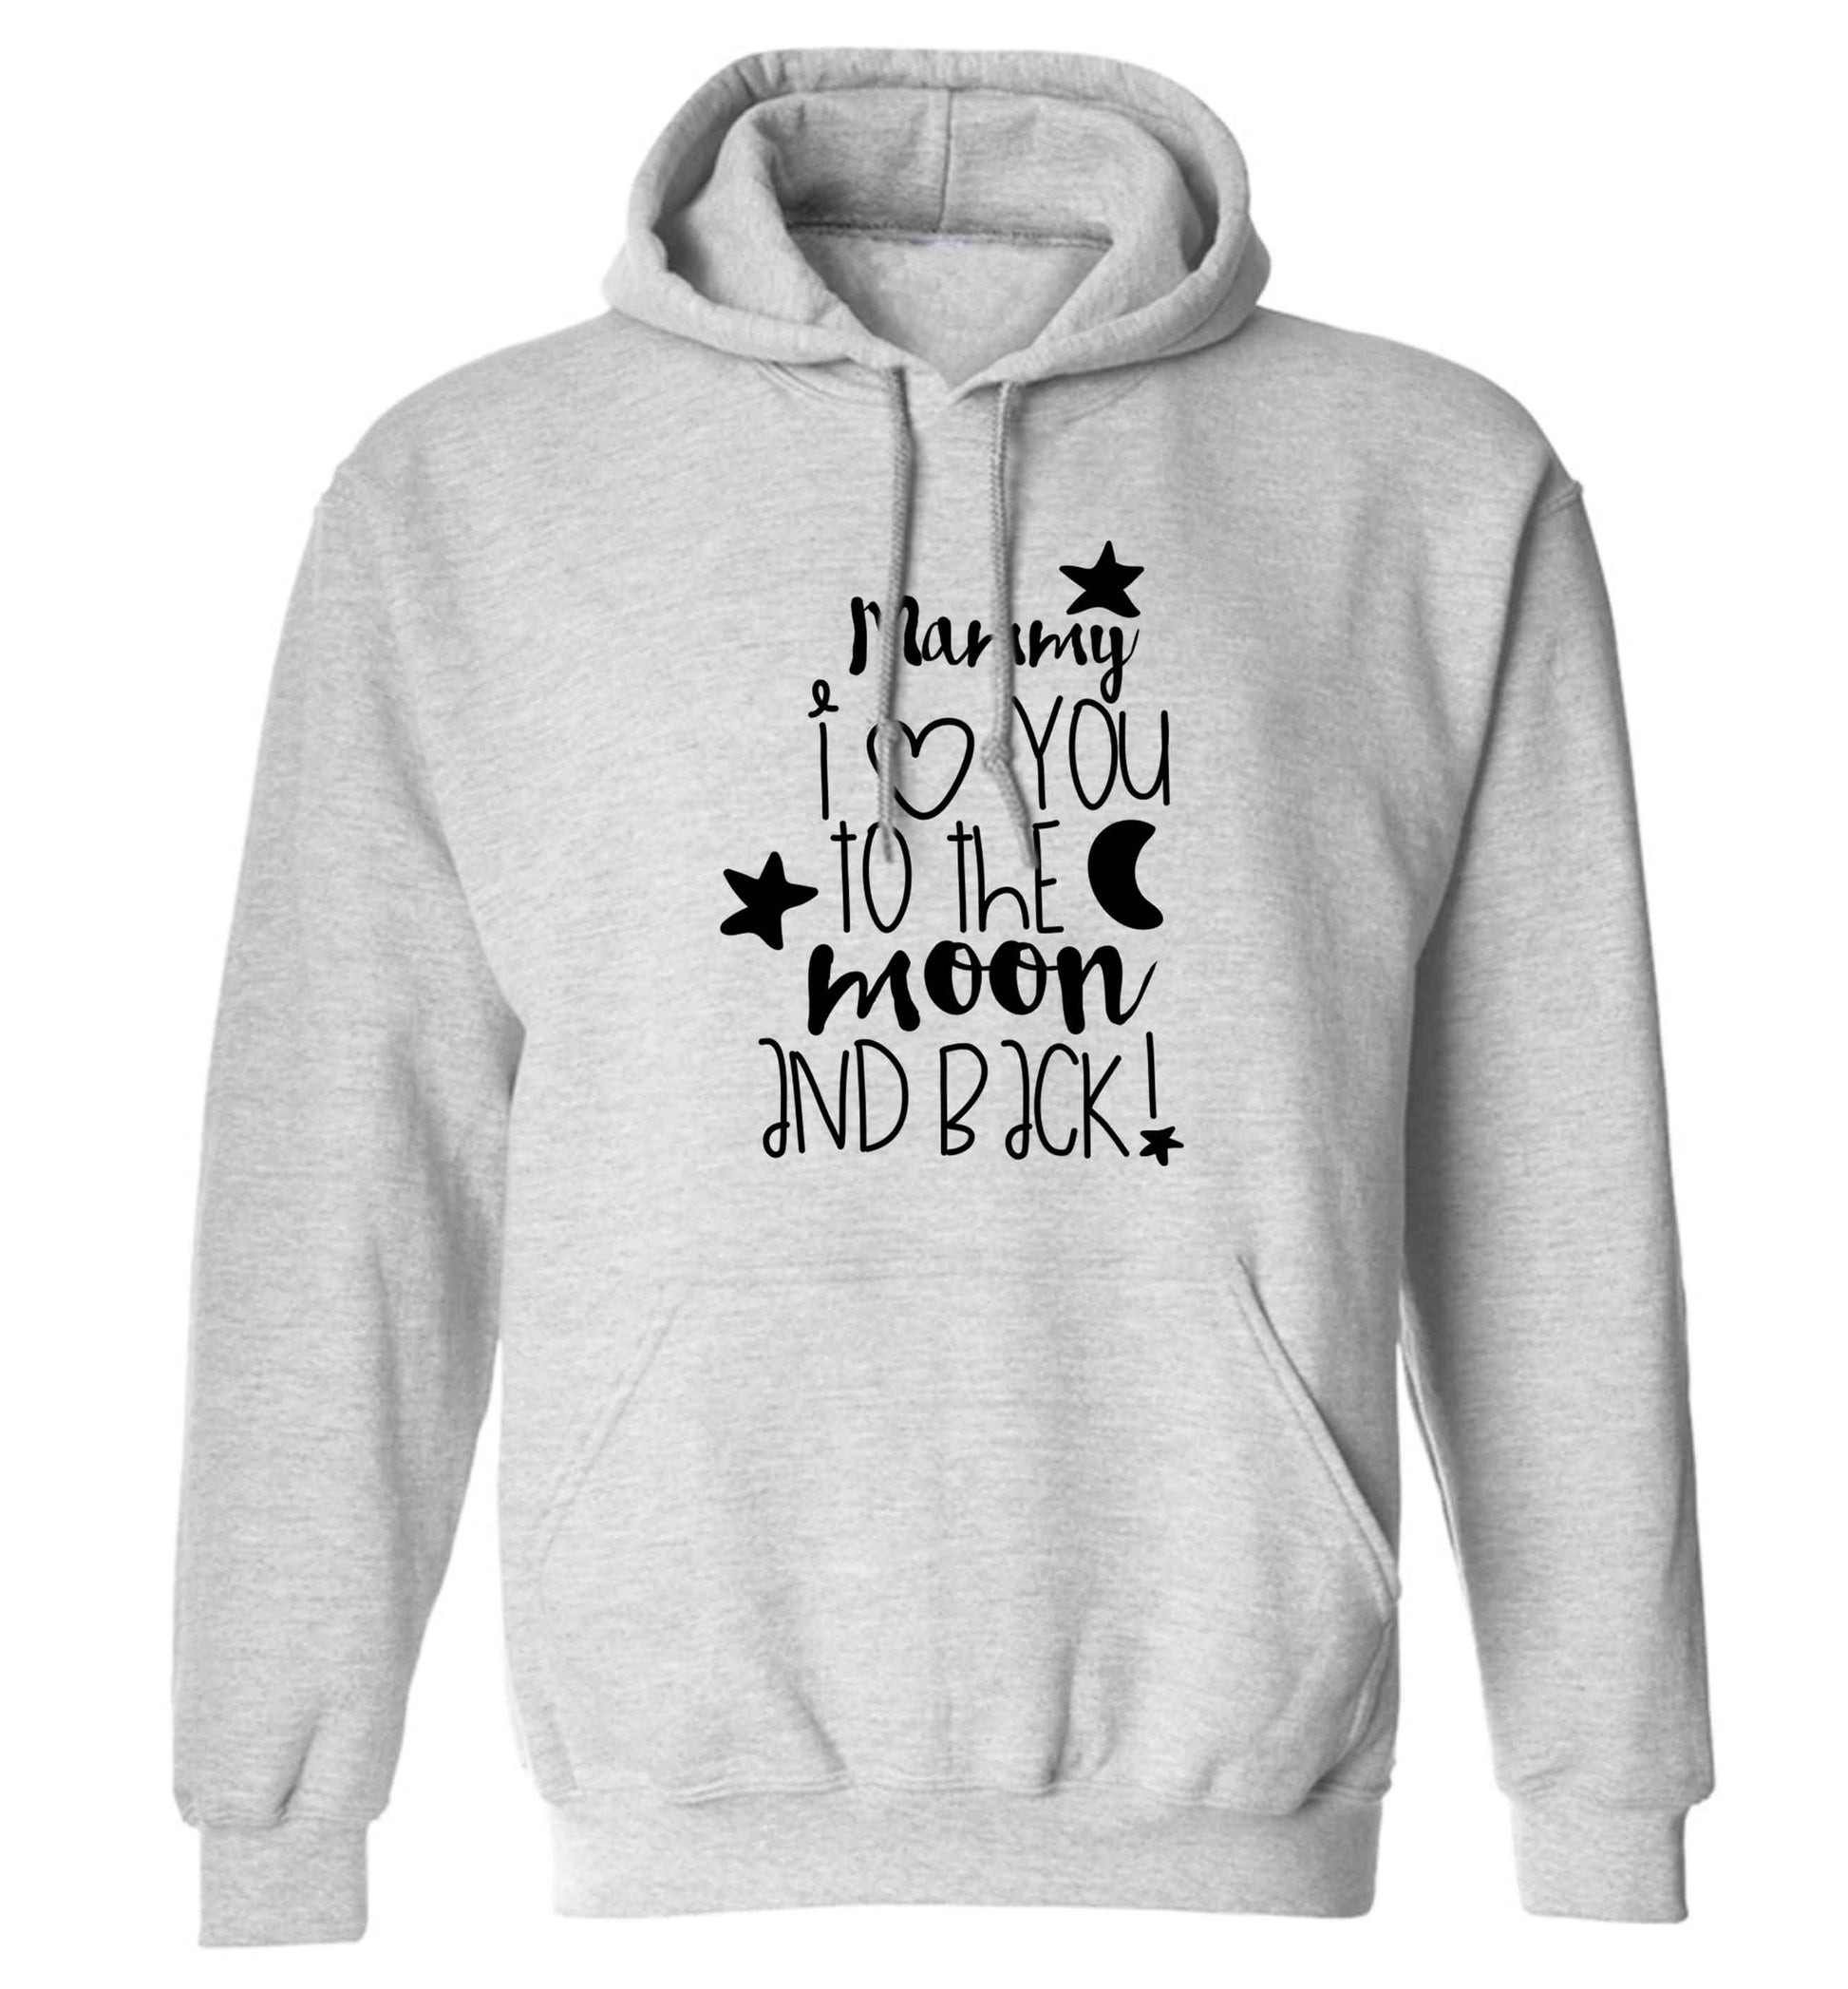 Mammy I love you to the moon and back adults unisex grey hoodie 2XL